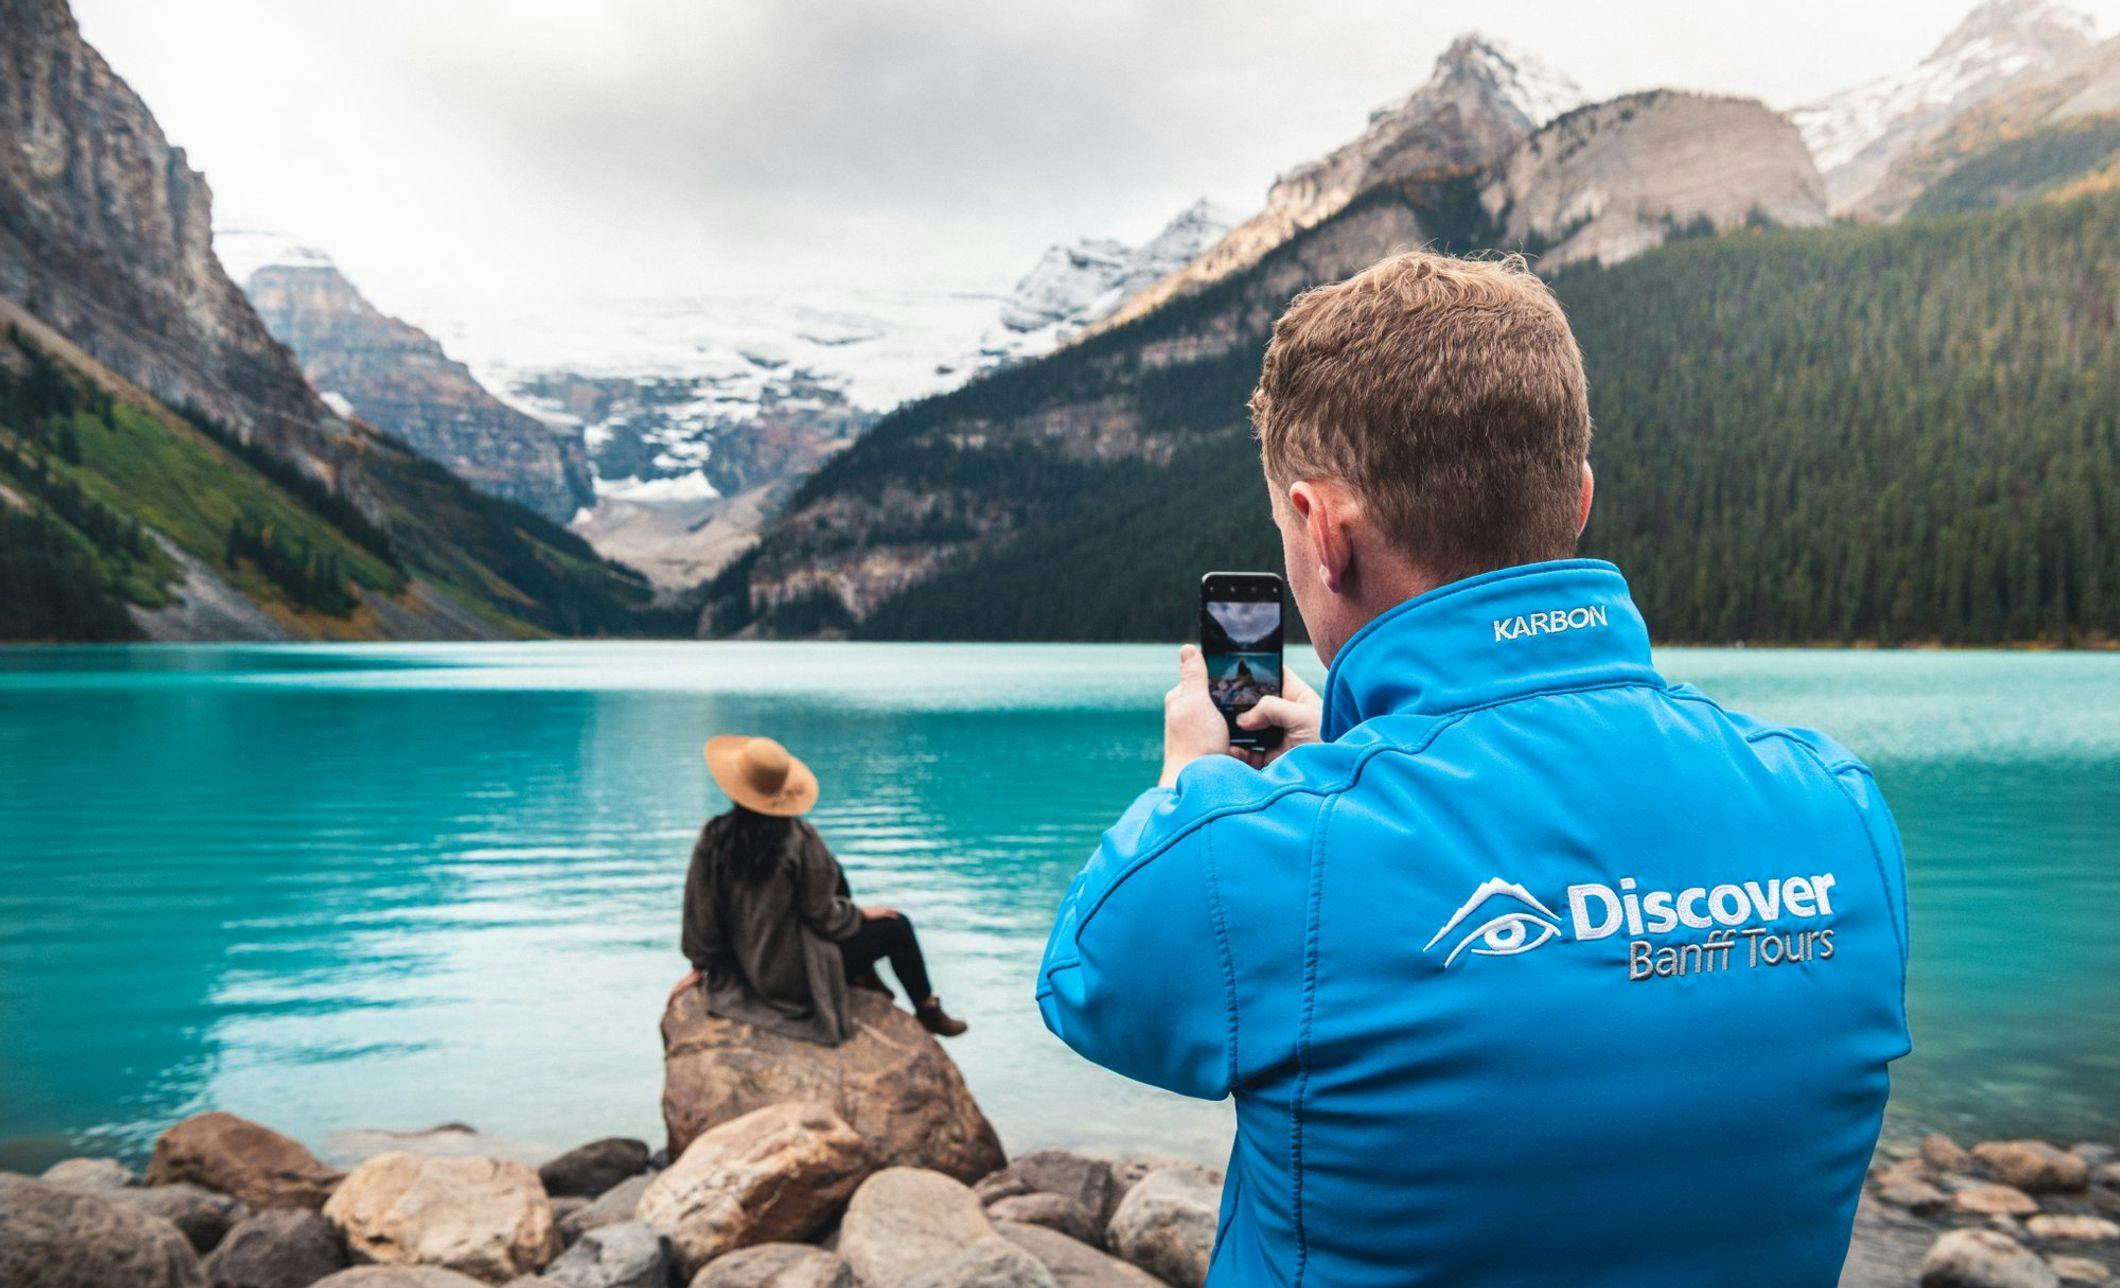 A tour guide takes a photo of a traveler in front of a blue lake and a large glacier as she poses on some rocks at the foot of the lake